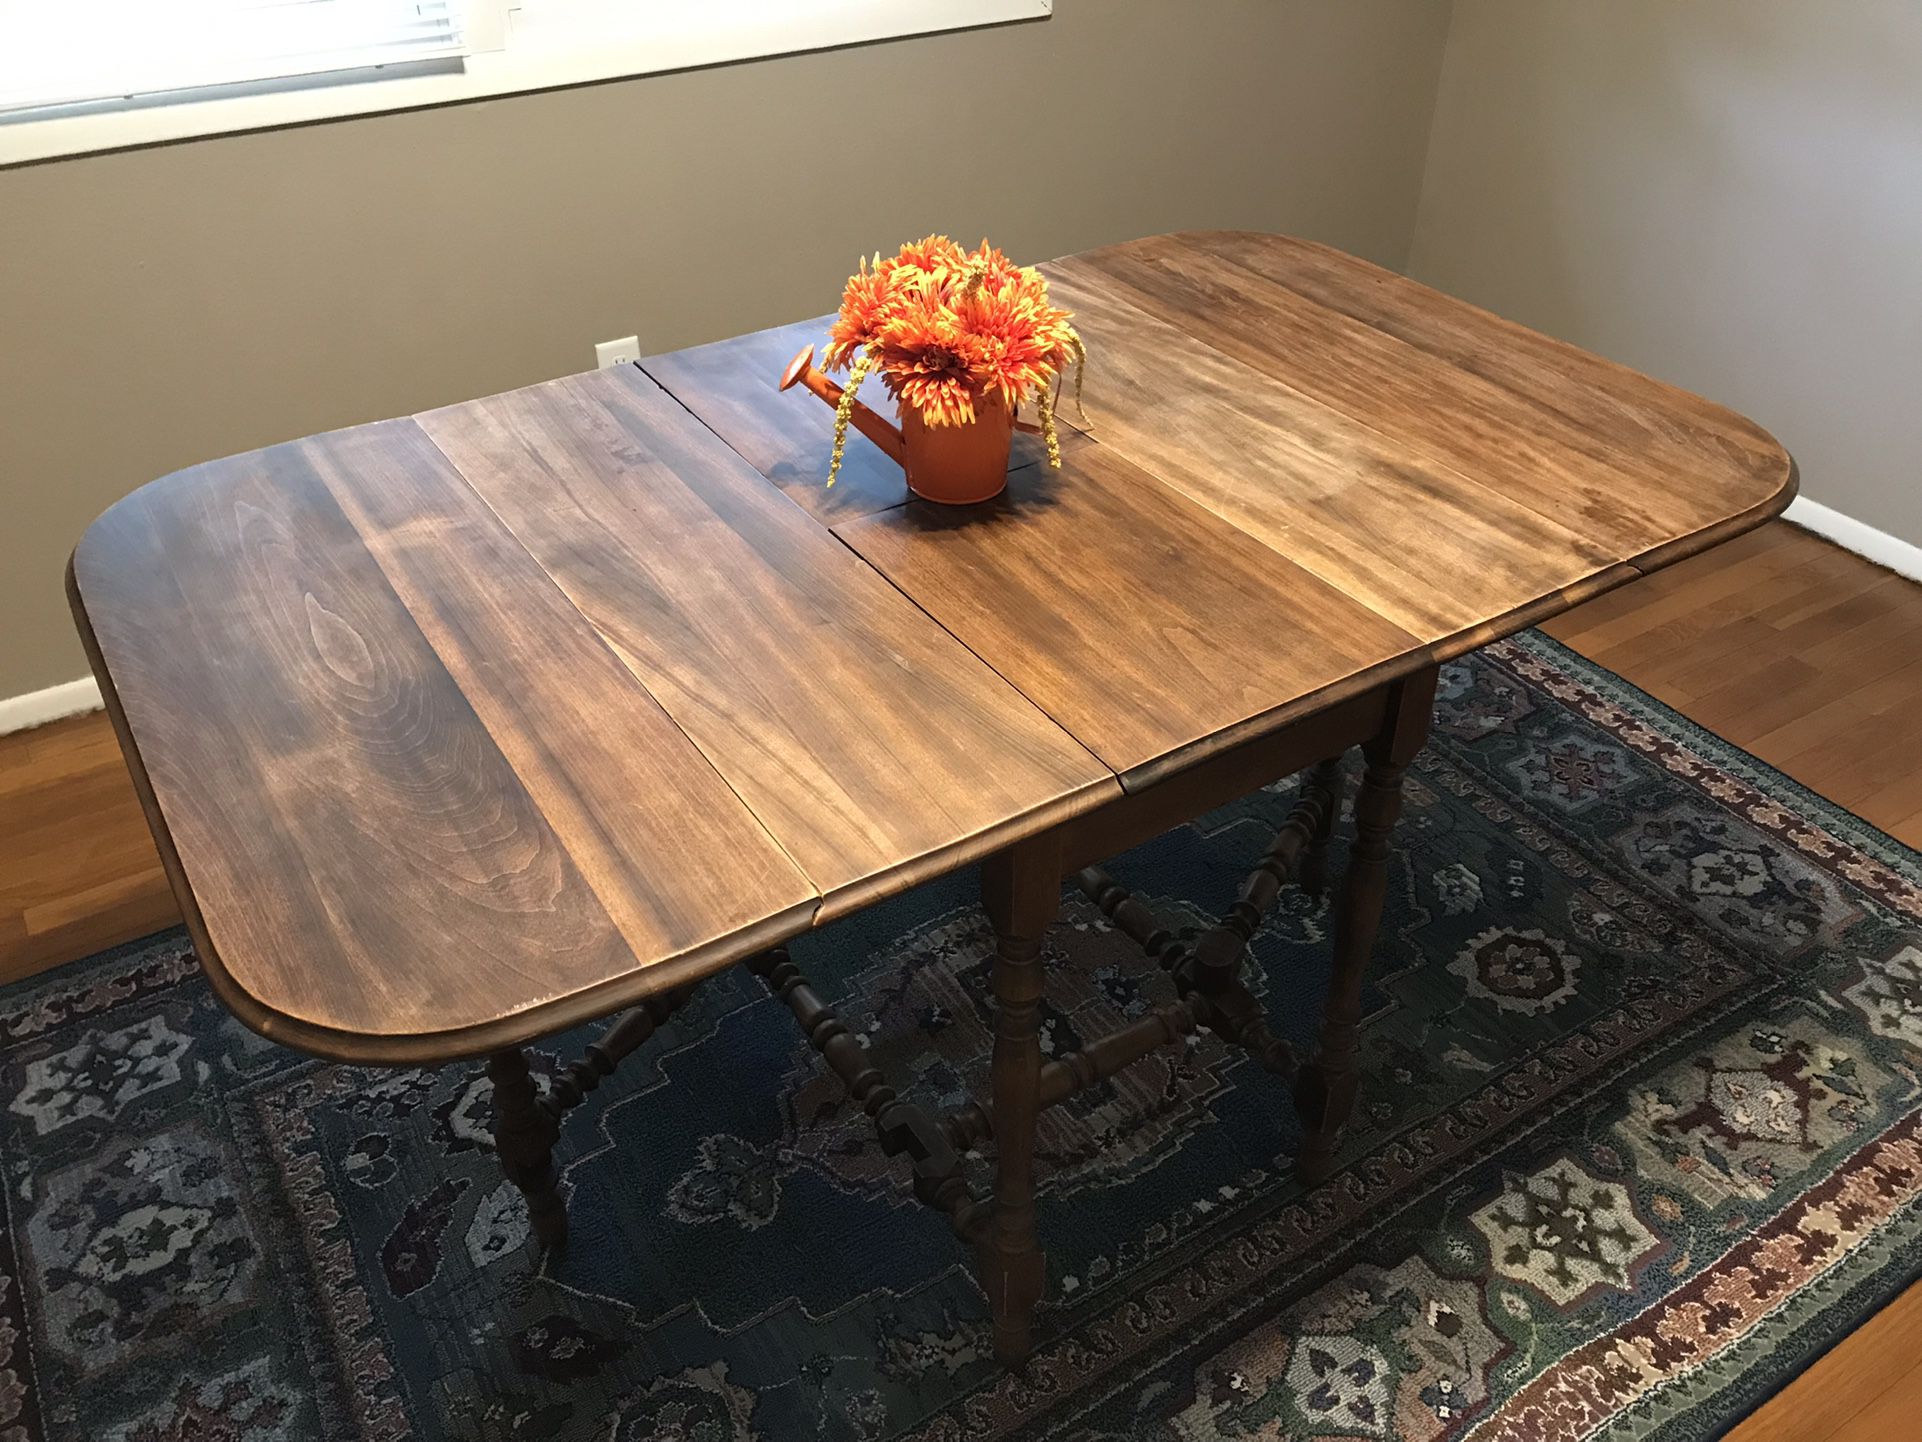 Antique Drop Leaf Table - Must Sell This Week 